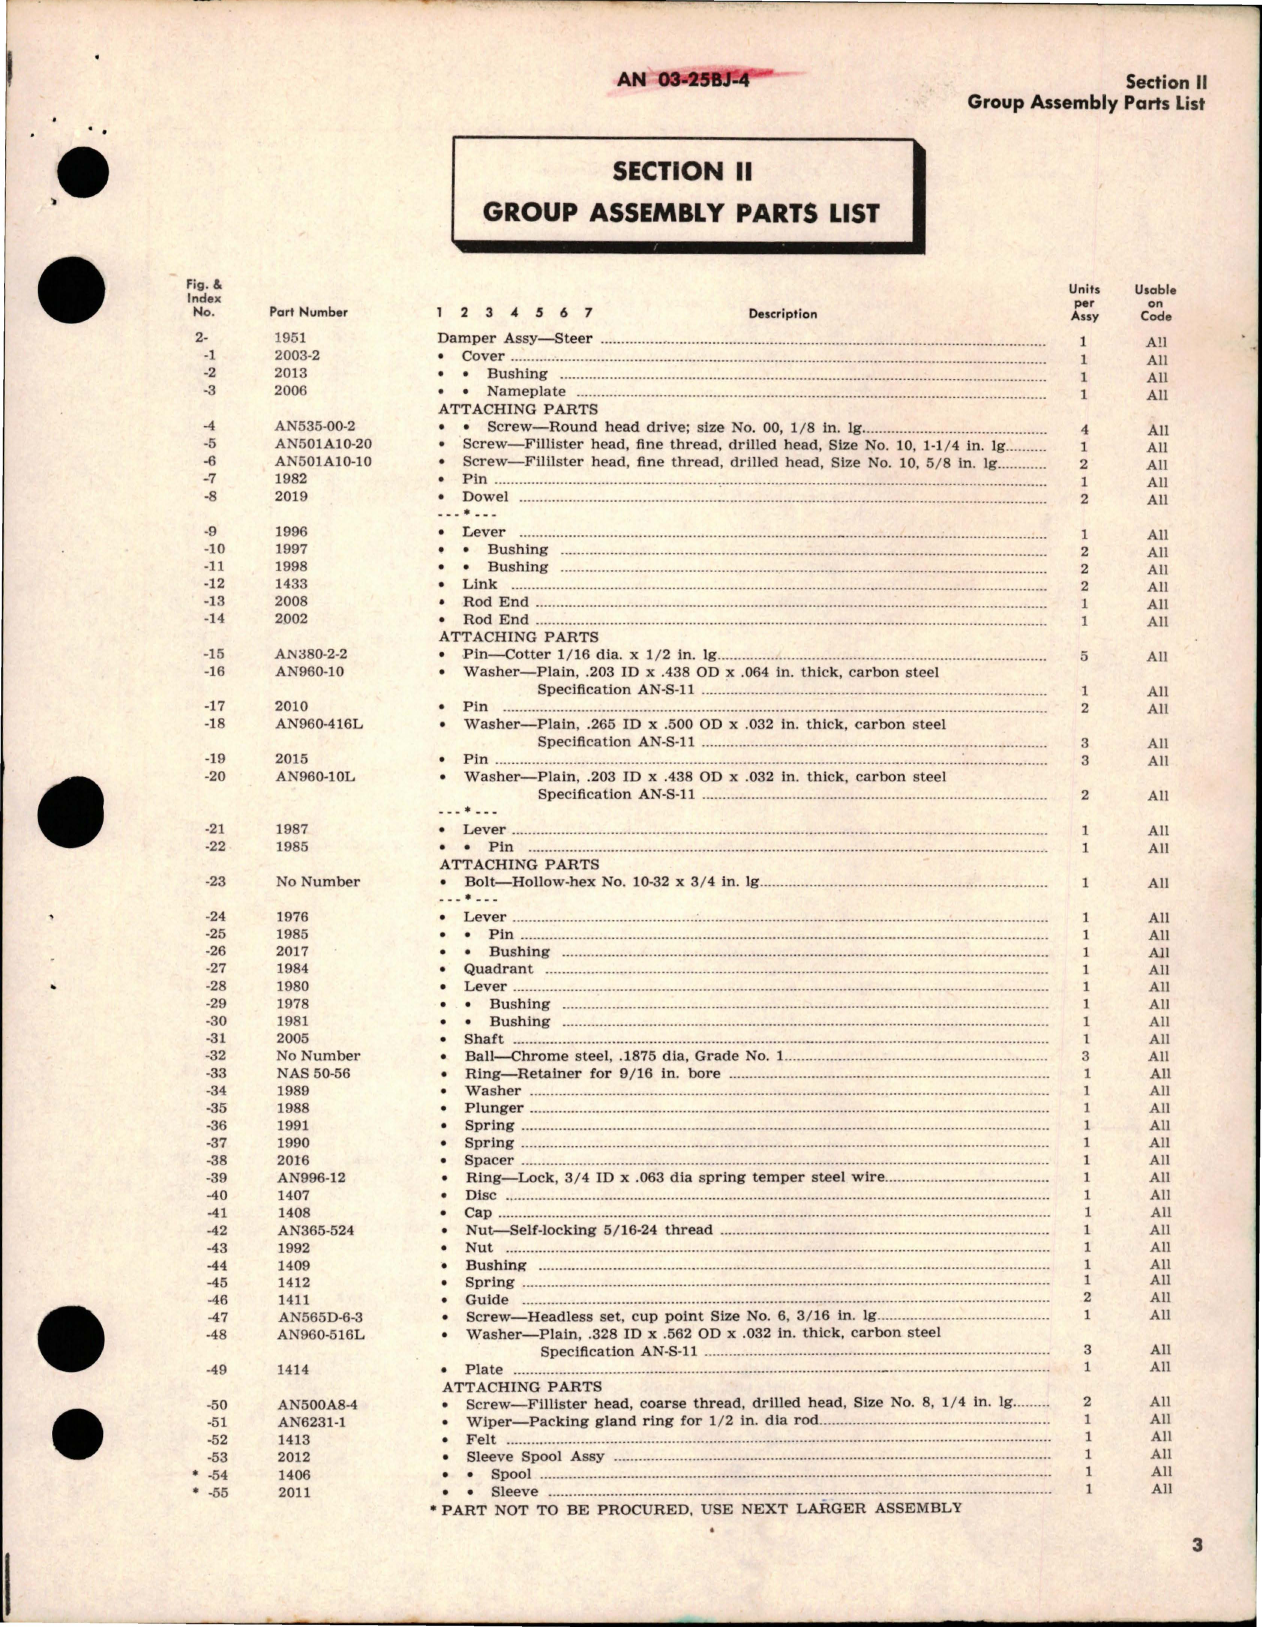 Sample page 5 from AirCorps Library document: Overhaul with Illustrated Parts Breakdown for Main Landing Gear Shock Strut